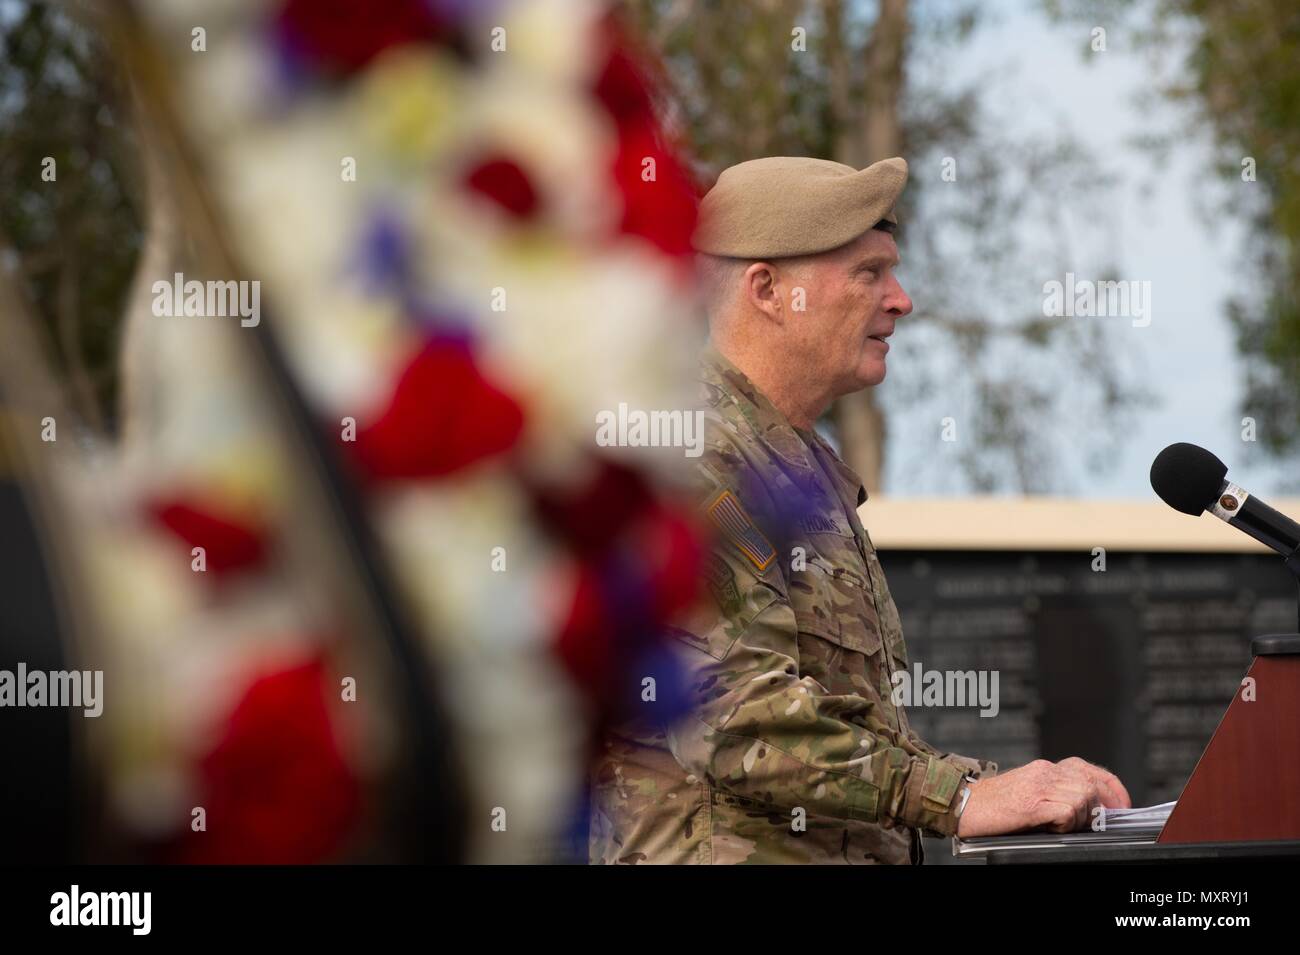 Army Gen. Raymond A. Thomas III, commander, U.S. Special Operations Command, speaks during a Memorial Day observation at the Special Operations Memorial on MacDill Air Force Base, Fla. May 24, 2018, May 24, 2018. The federal holiday serves as a time to honor service members who died while serving in the armed forces. (Photo by U.S. Air Force Master Sgt. Barry Loo). () Stock Photo